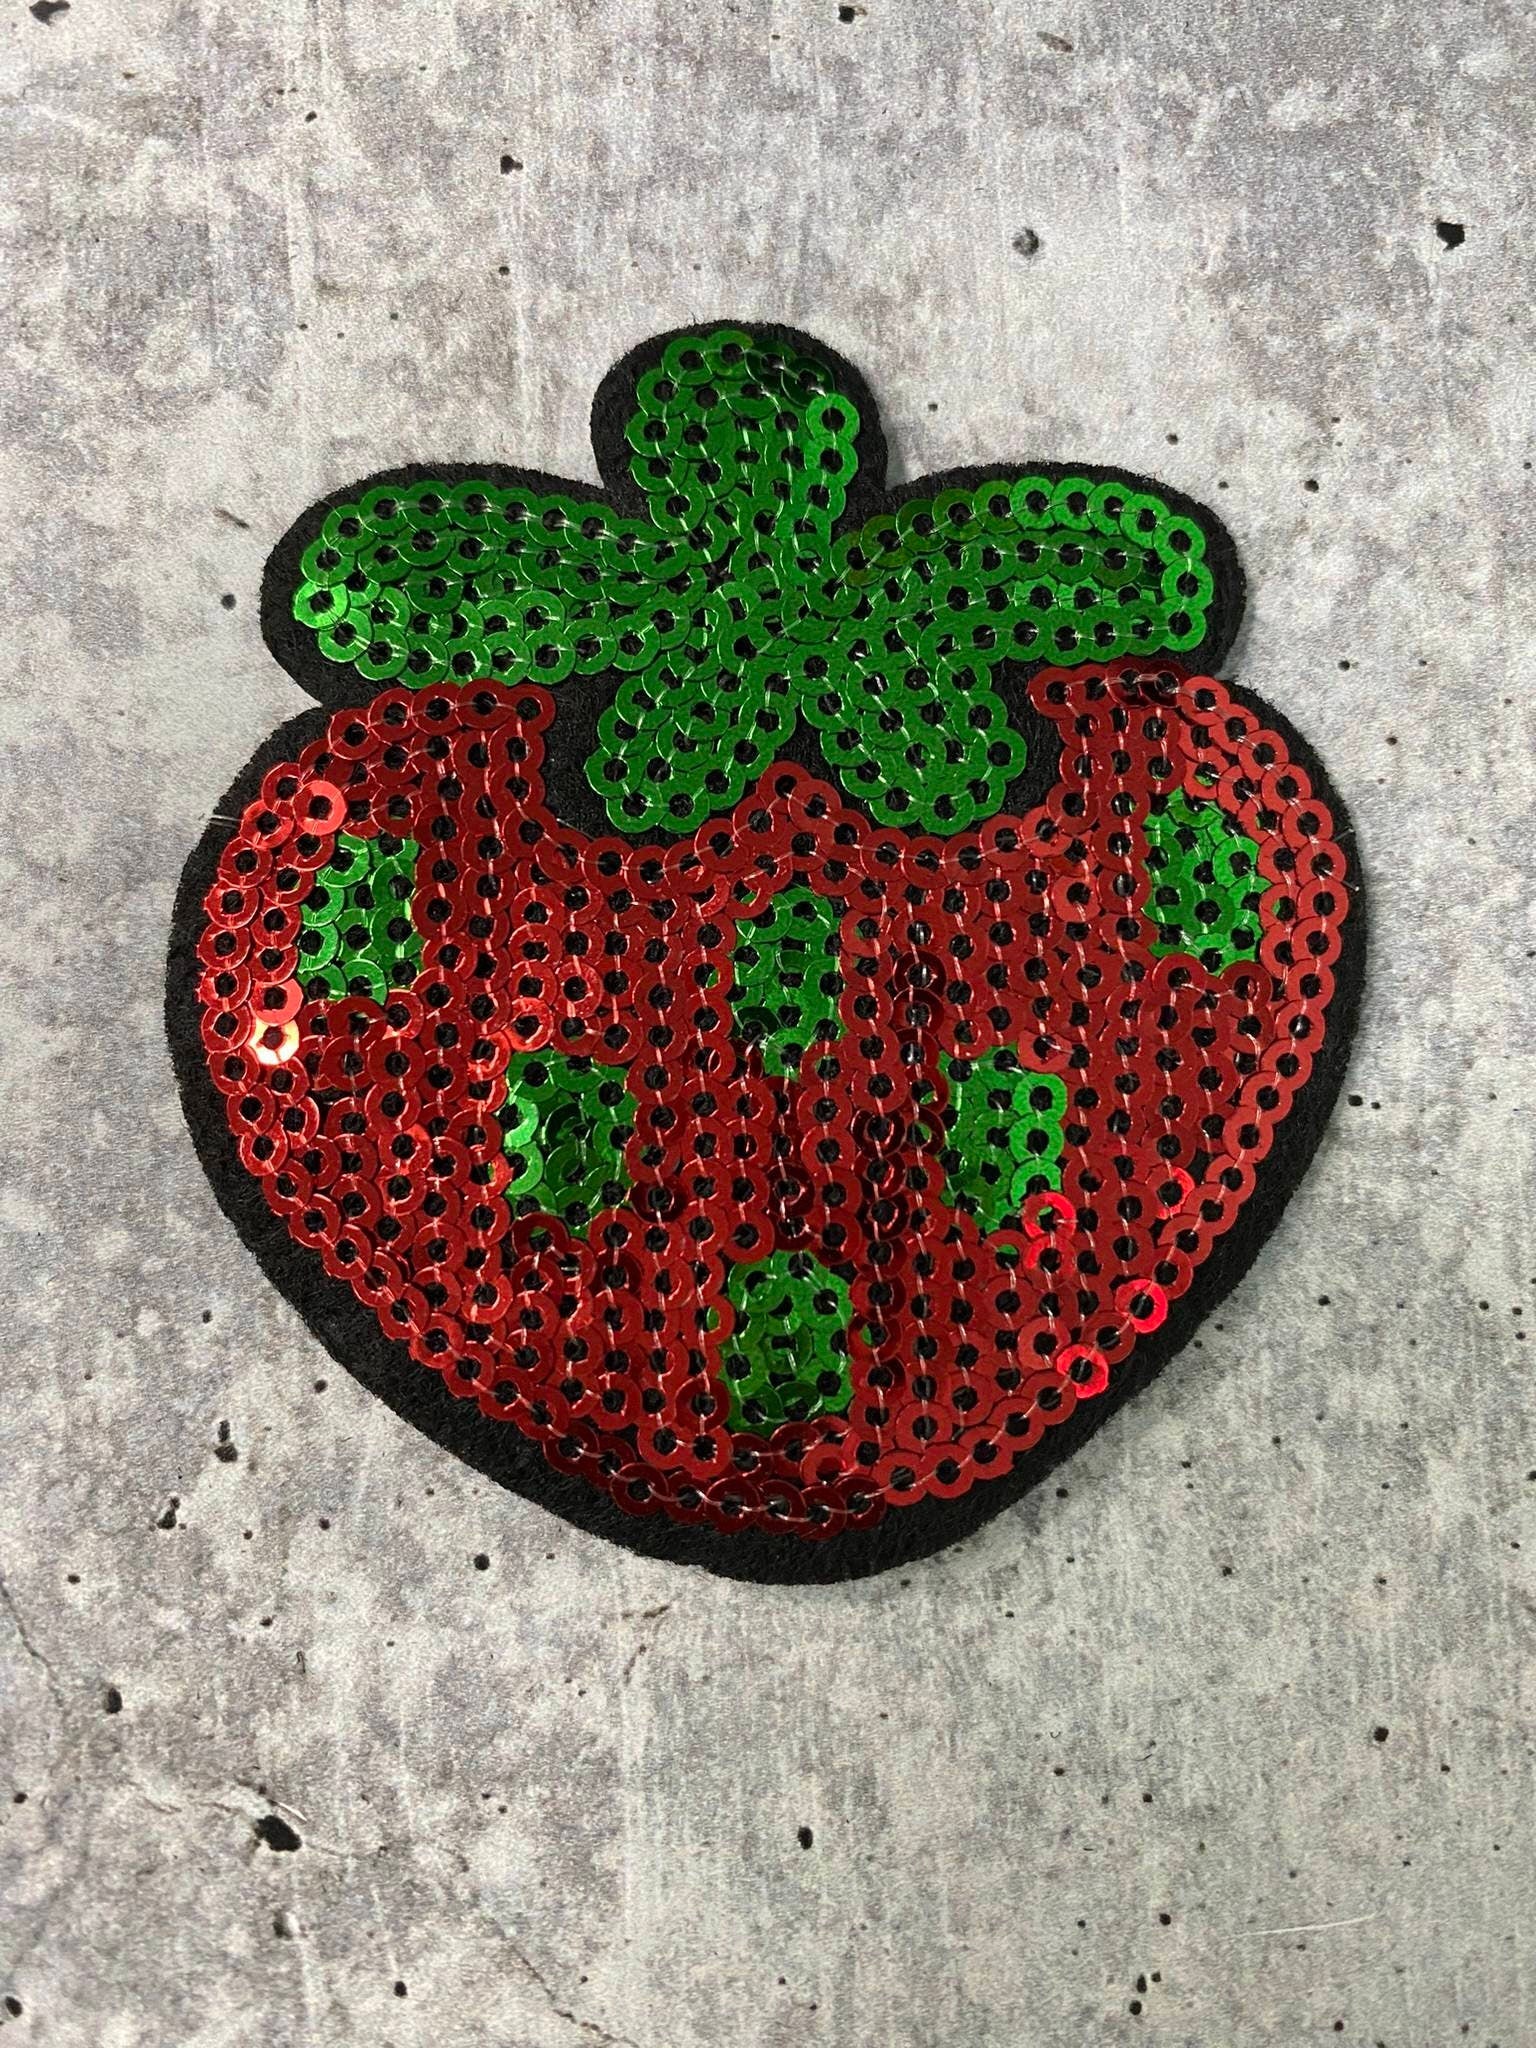 New, 2-pc Set, "Sparkling Strawberry Patch" Embroidery and Sequins Fruit Design for Clothing and Accessories, Iron-on Applique, Size 2"